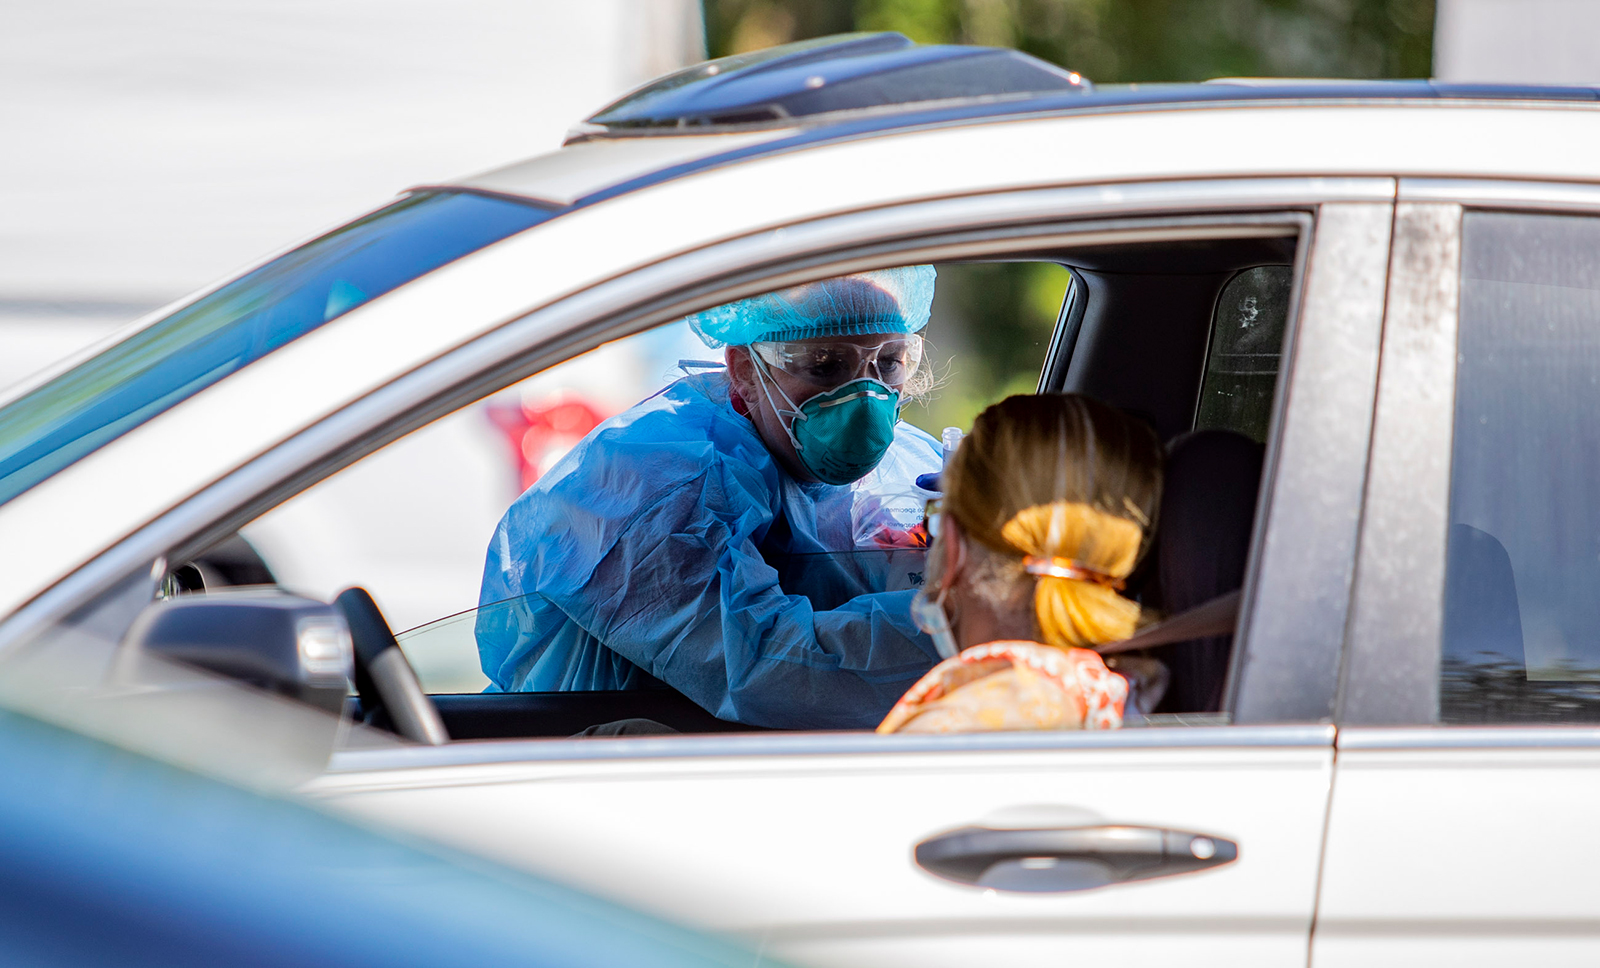 Tidelands Health medical professionals conduct a drive-through Covid-19 testing site on Friday July 17, at Myrtle Beach Pelicans Ballpark in Myrtle Beach, South Carolina.